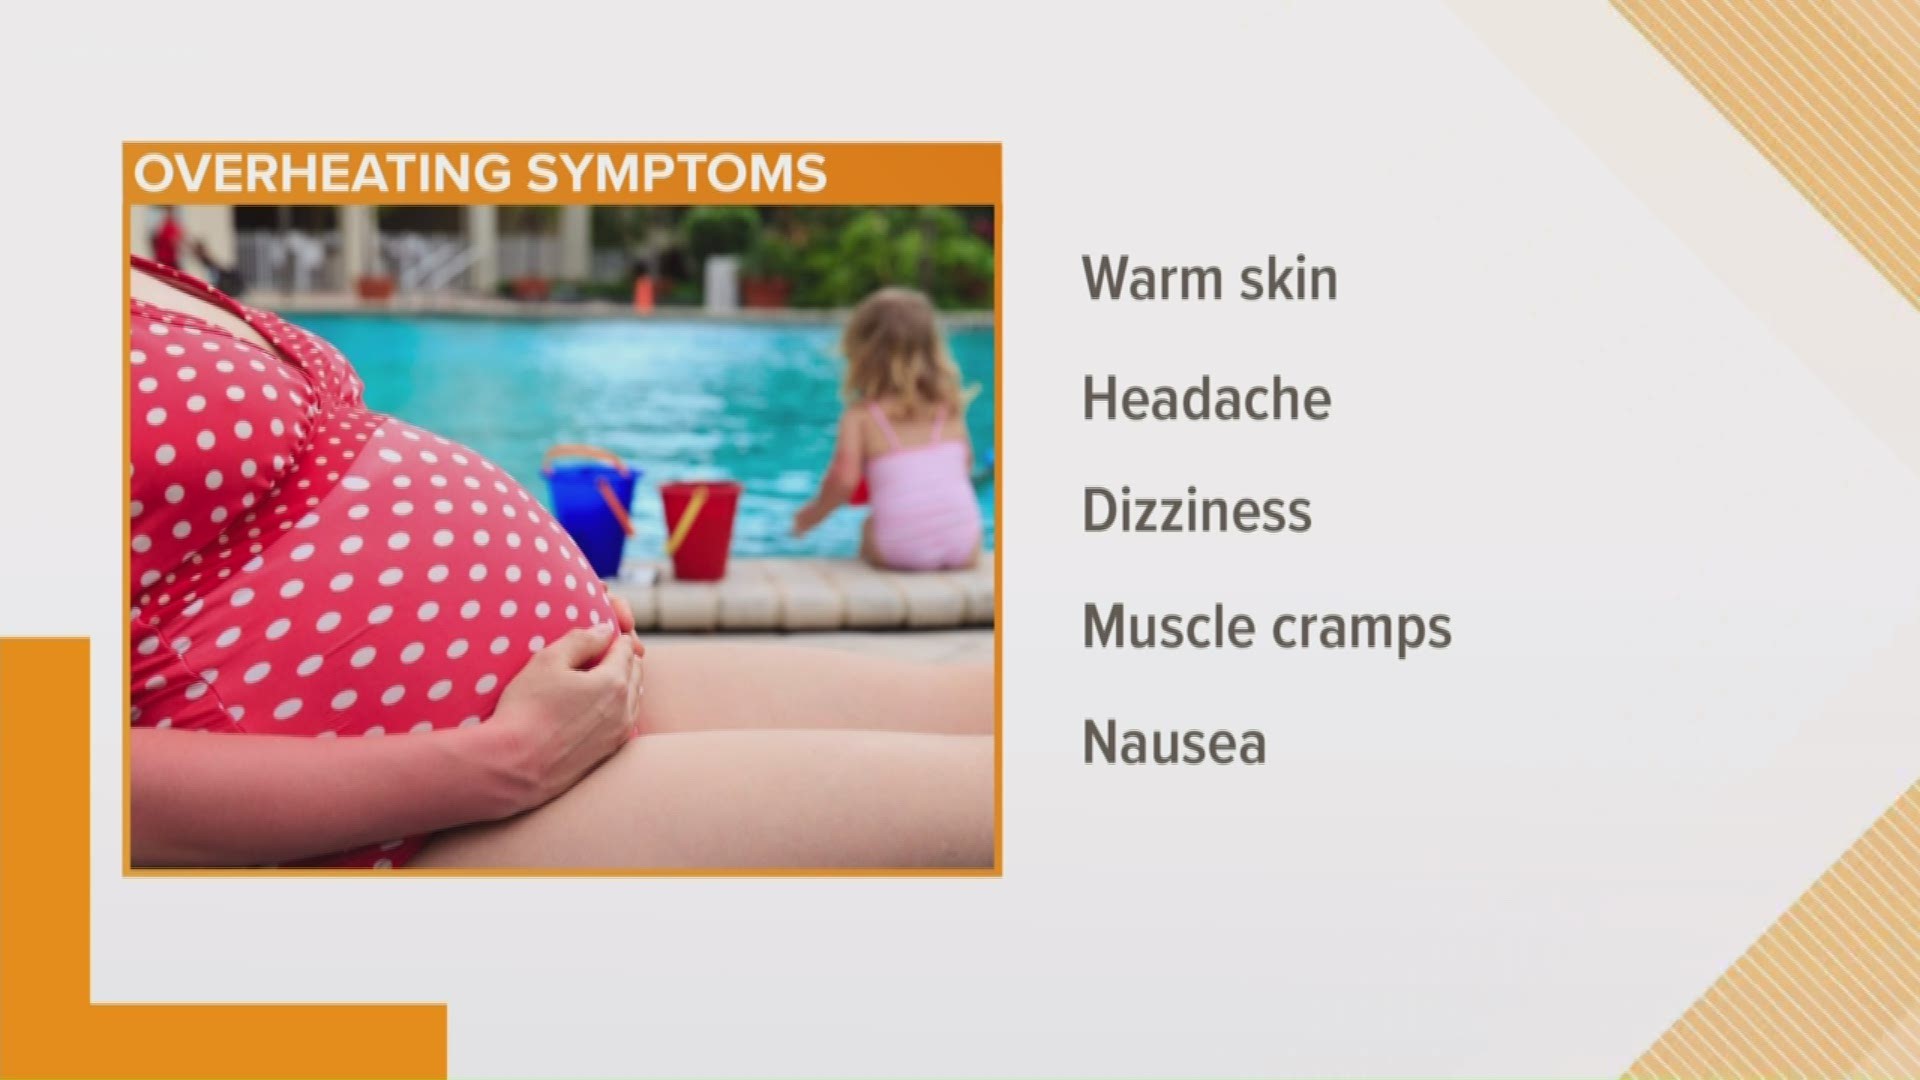 Touro's OBGYN Dr. Brianne Anderson has some tips for the expectant mother on how to carefully enjoy the summer season.